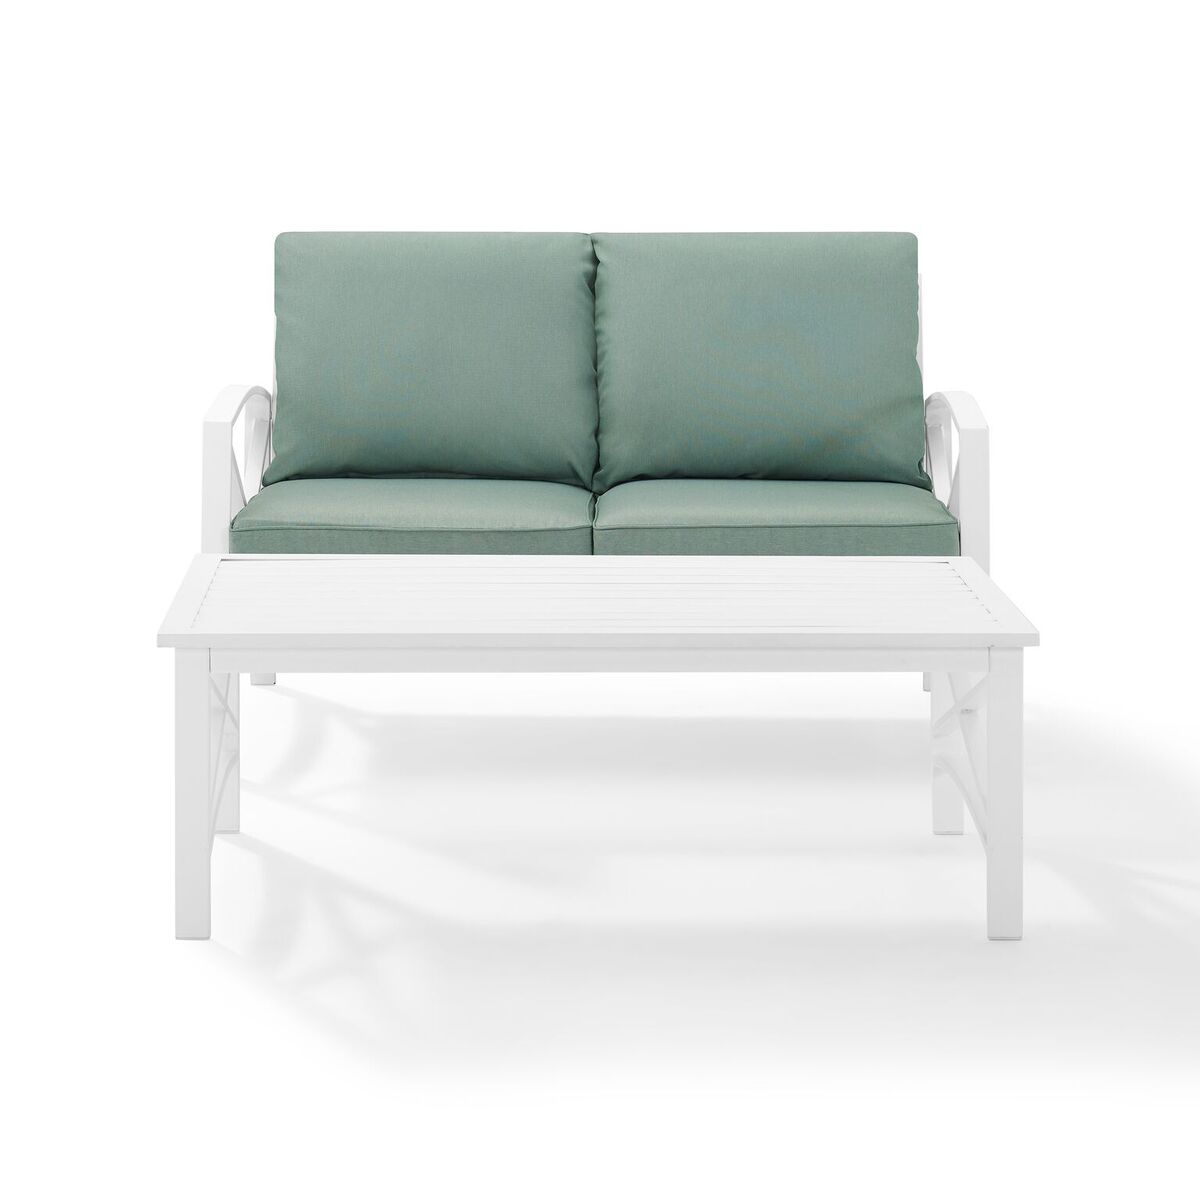 Ko60010wh-mi Kaplan 2-piece Outdoor Seating Set In White With Mist Cushions